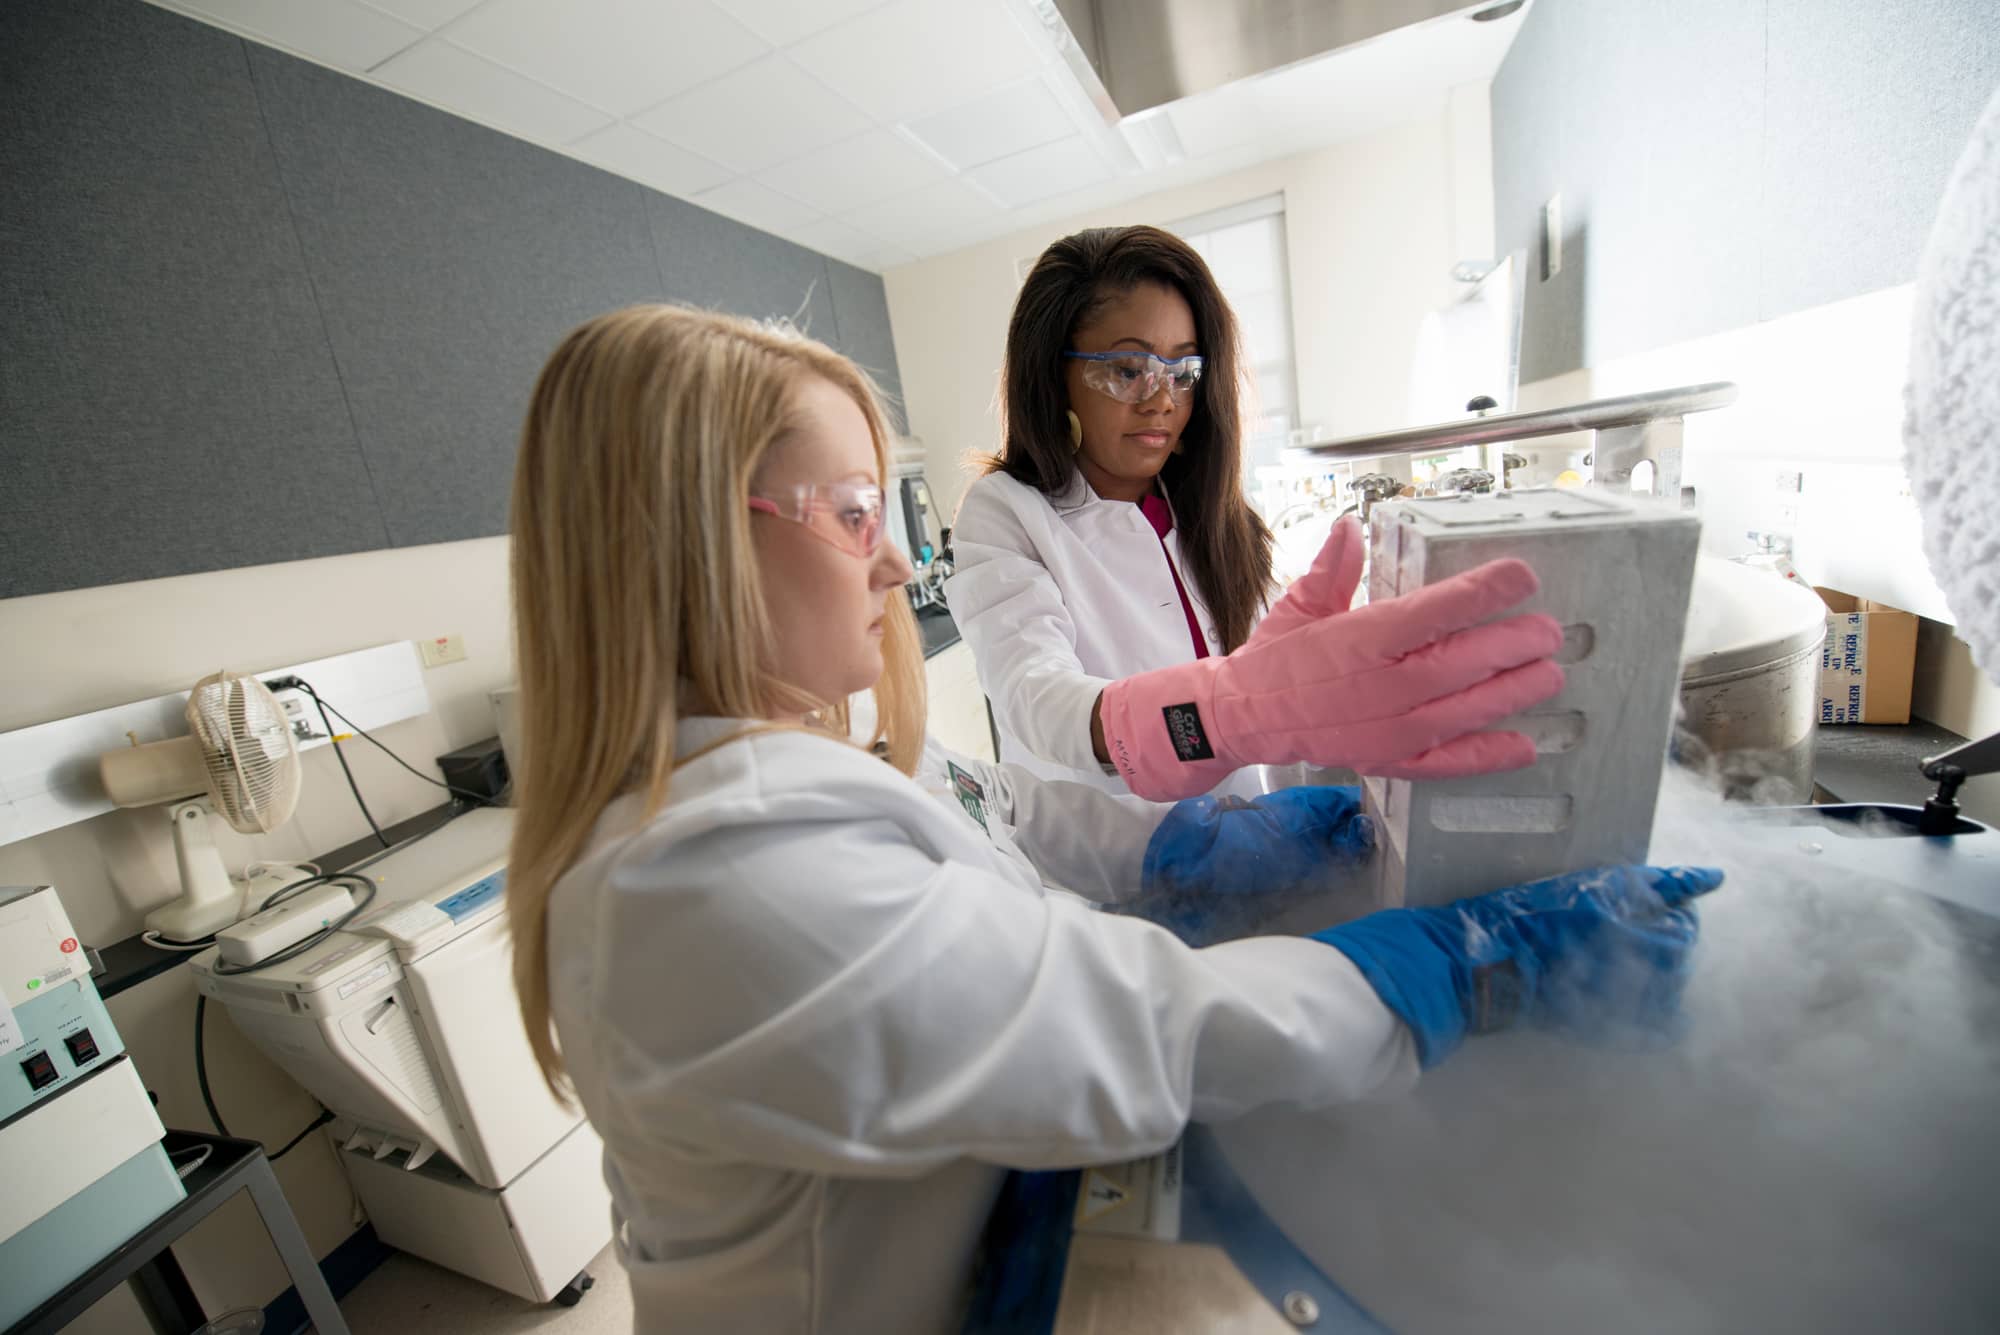 Heritage College Professor Kelly McCall, Ph.D., and student LaDonya Jackson work in the Academic and Research Center. McCall, along with Russ College professor Douglas Goetz, Ph.D., received a grant to investigate possible treatments to mitigate the severity of COVID-19.